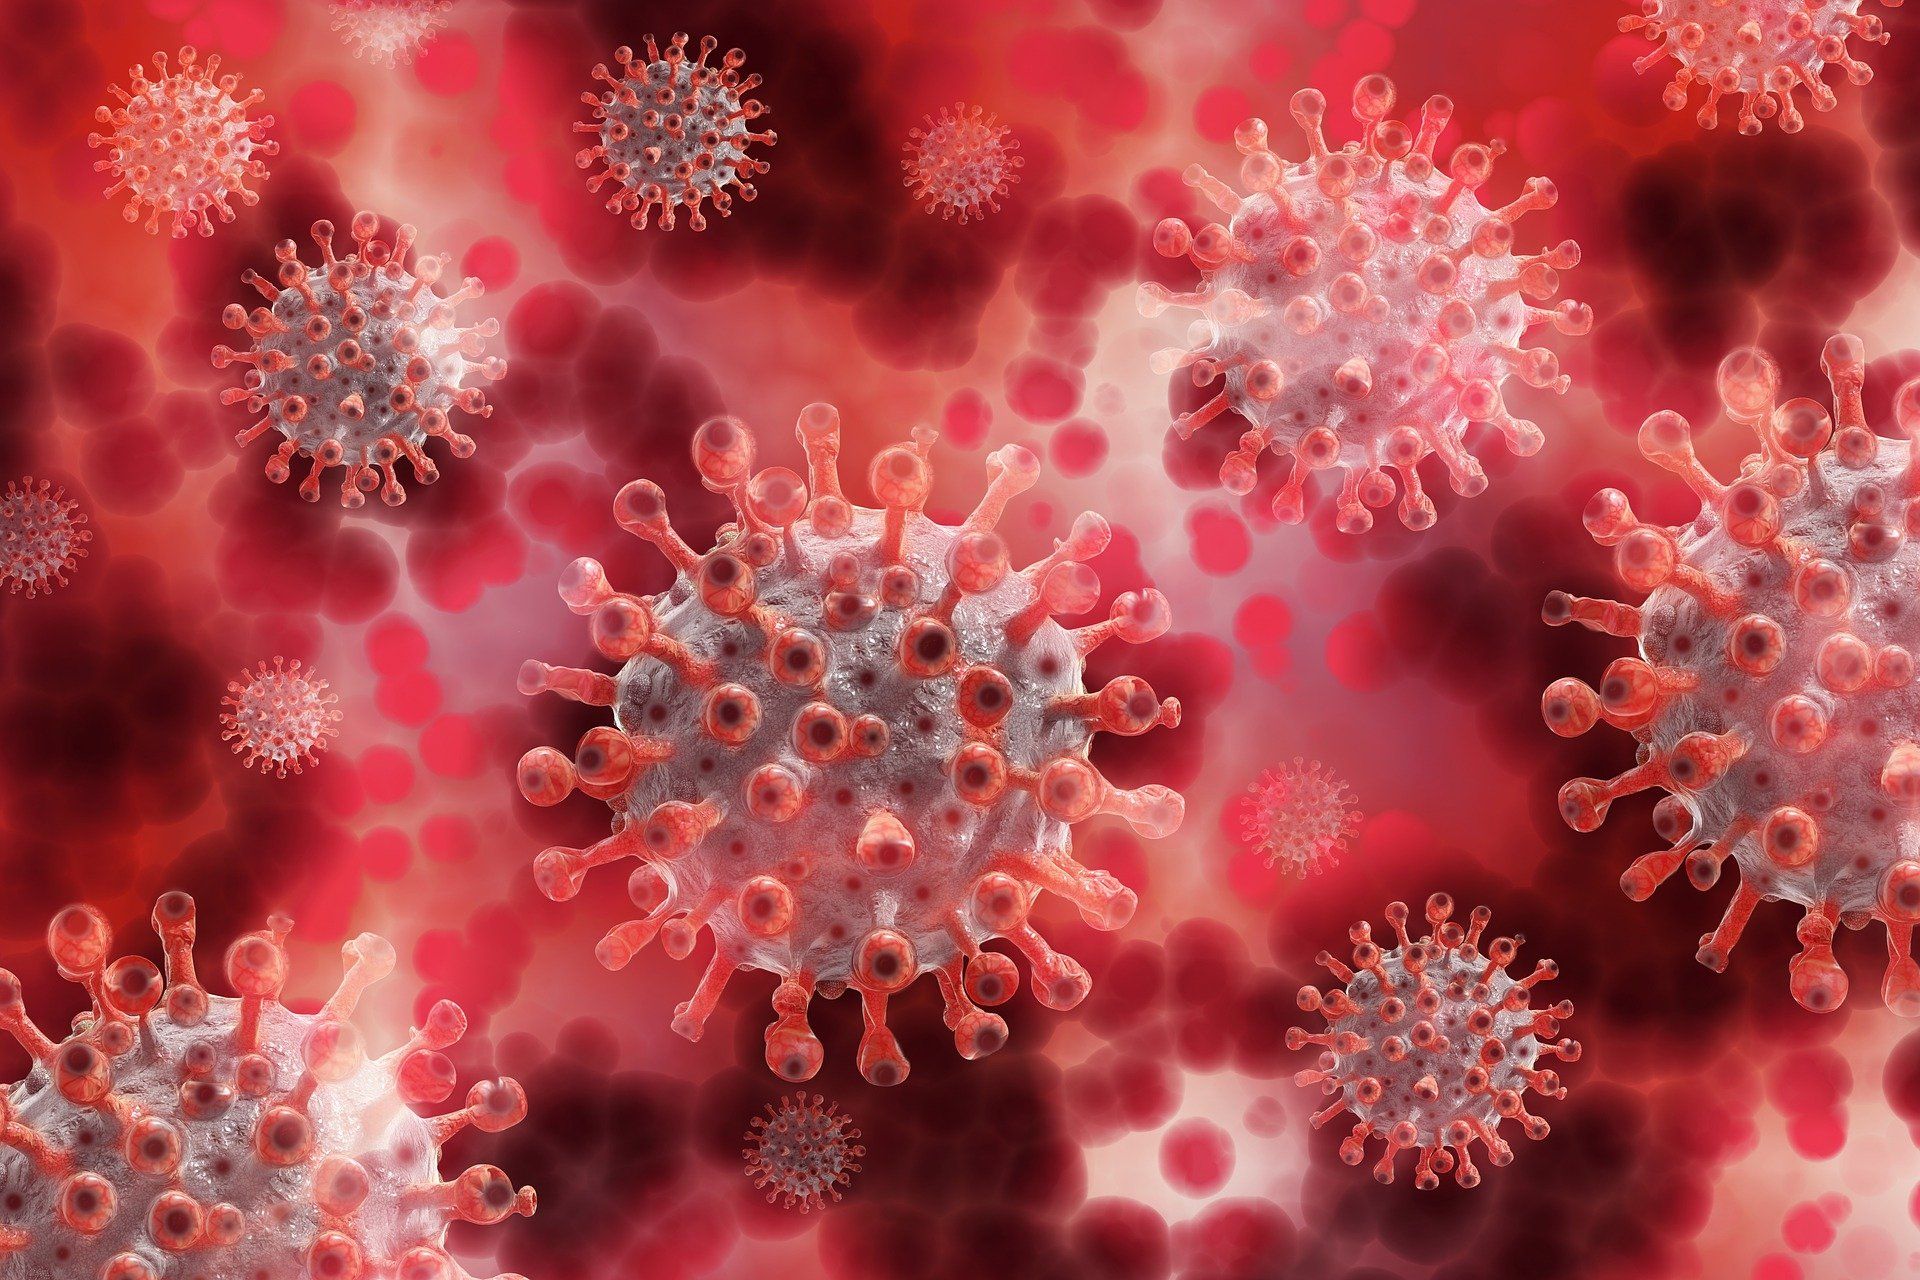 Chile reports Latin America’s first detected case of new virus strain